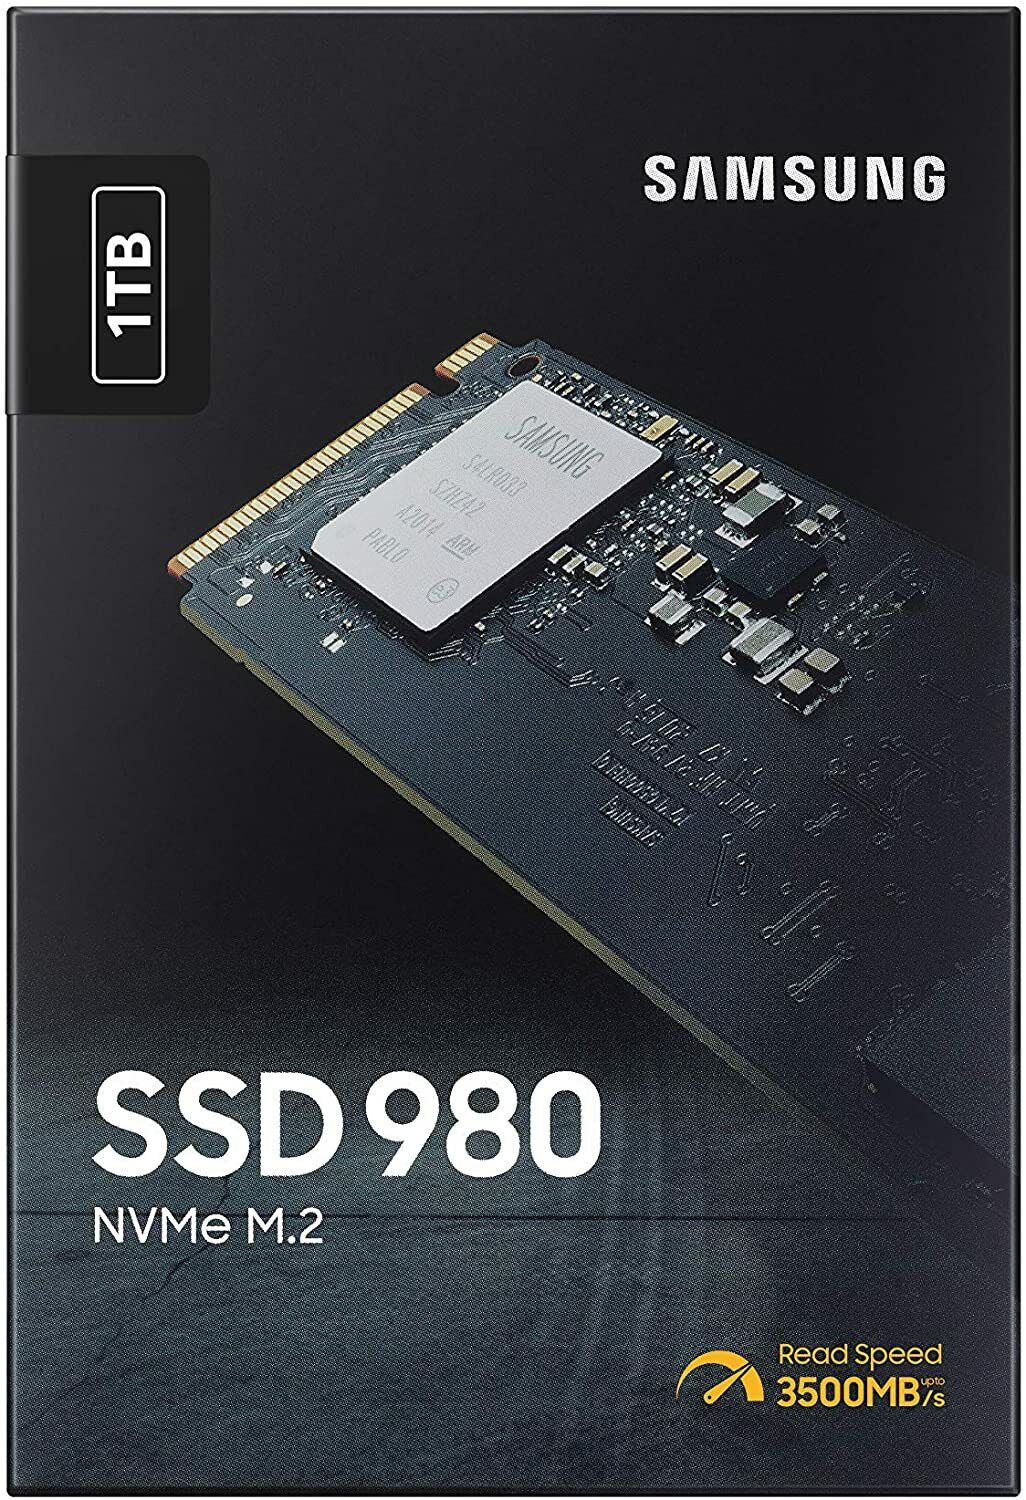 Samsung - 980 1TB SSD PCIe 3.0 M.2 NVMe Internal Gaming Solid State Drive - 2021